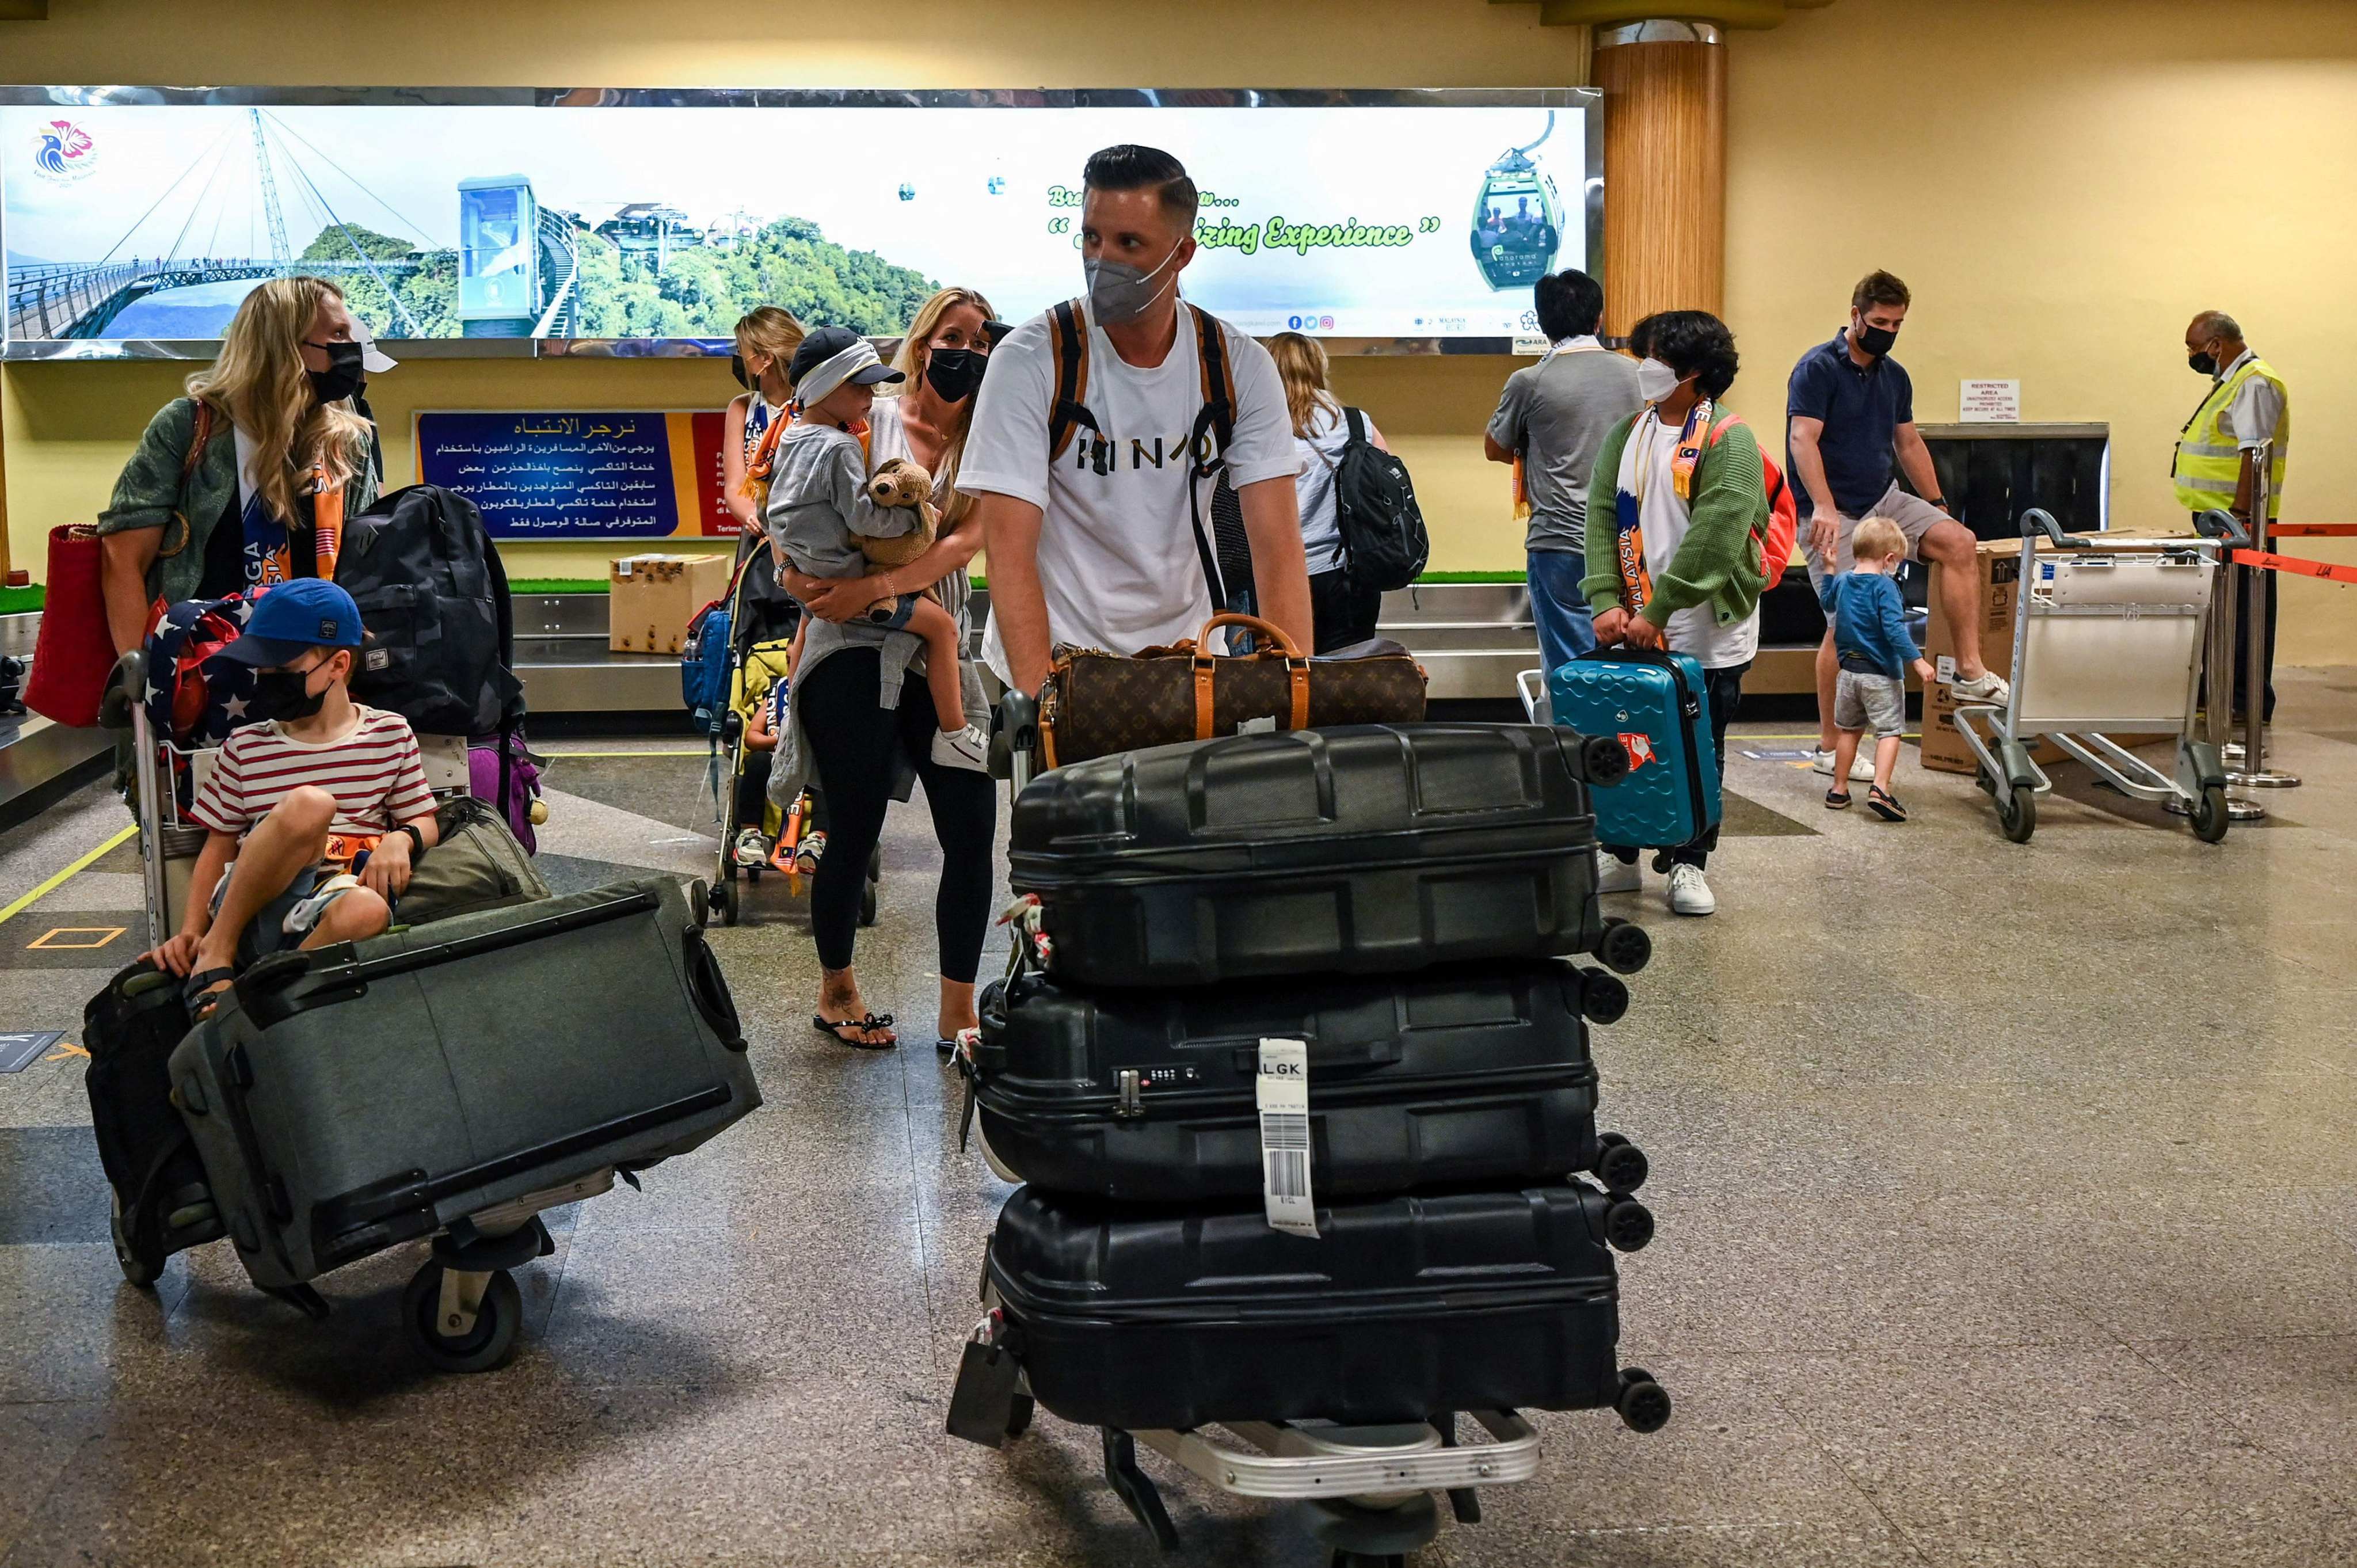 Passengers collect their luggage after landing in Langkawi from Kuala Lumpur International Airport on September 16, 2021, as the holiday island reopened to domestic tourists following closures due to restrictions to halt the spread of the Covid-19 coronavirus. Photo: AFP